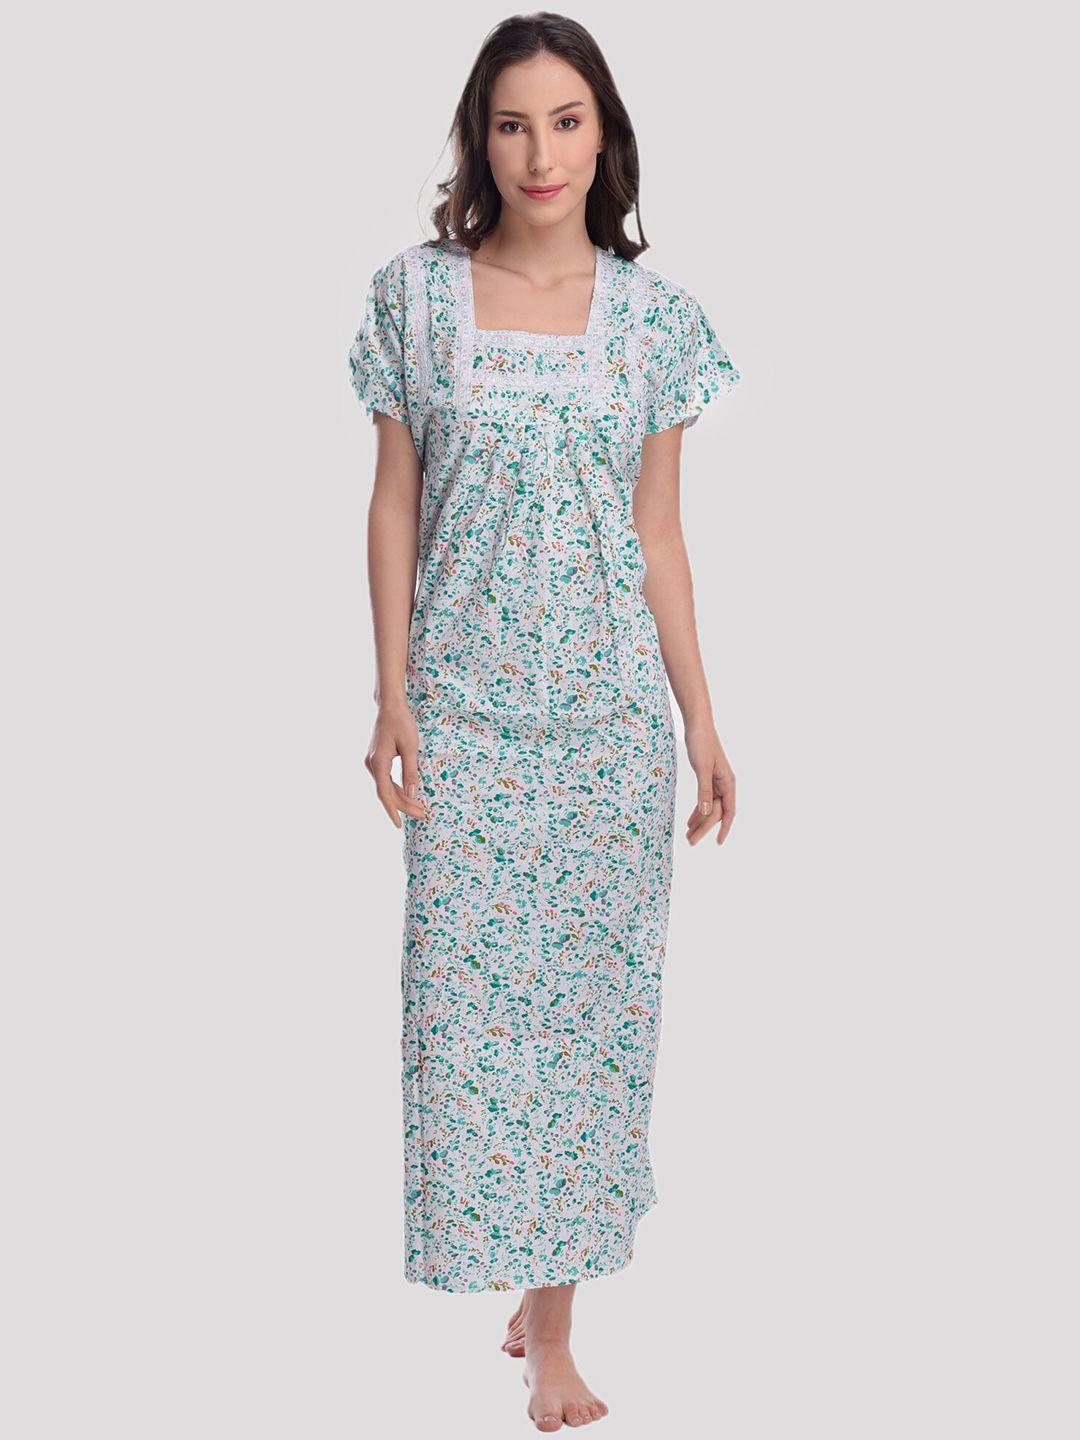 cierge-green-&-white-floral-printed-pure-cotton-maxi-nightdress